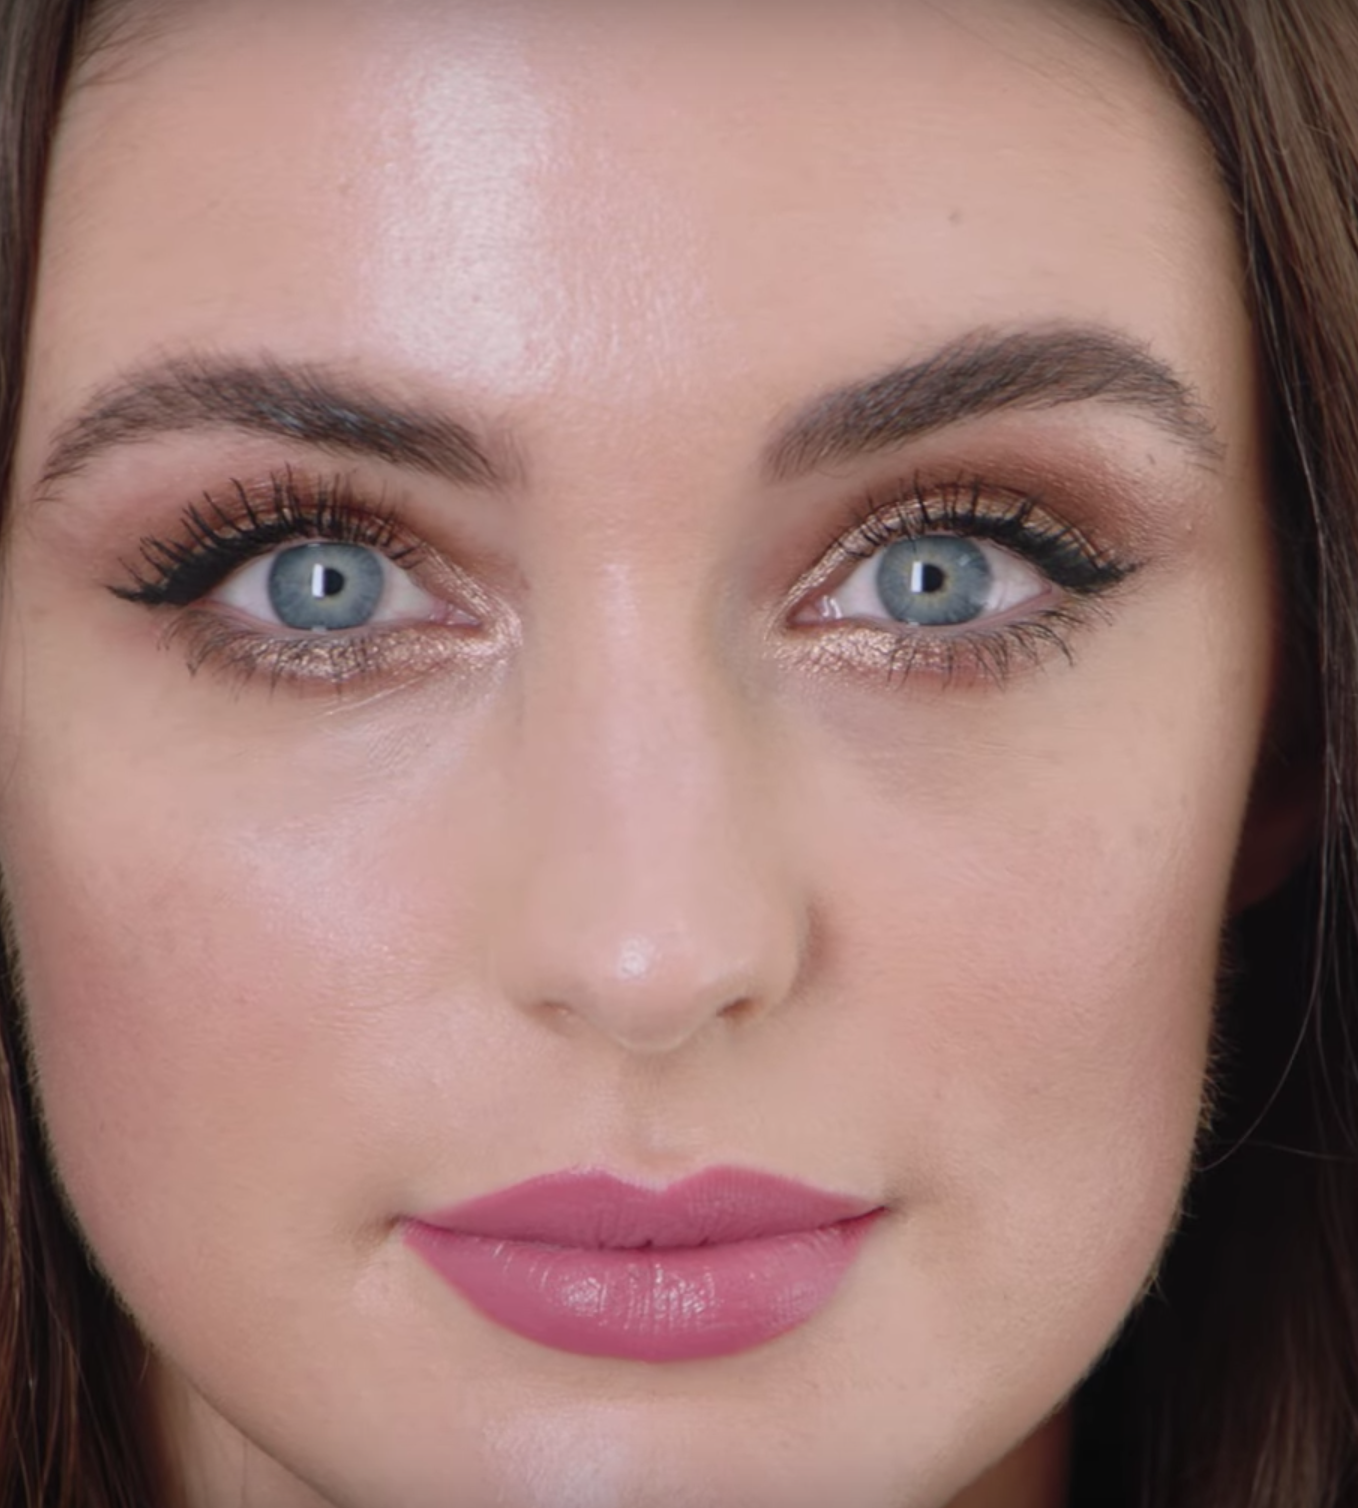 A fair-tone model with blue eyes wearing shimmery cream and champagne eye makeup that makes her eyes look brighter with a matte lipstick in a magenta shade.